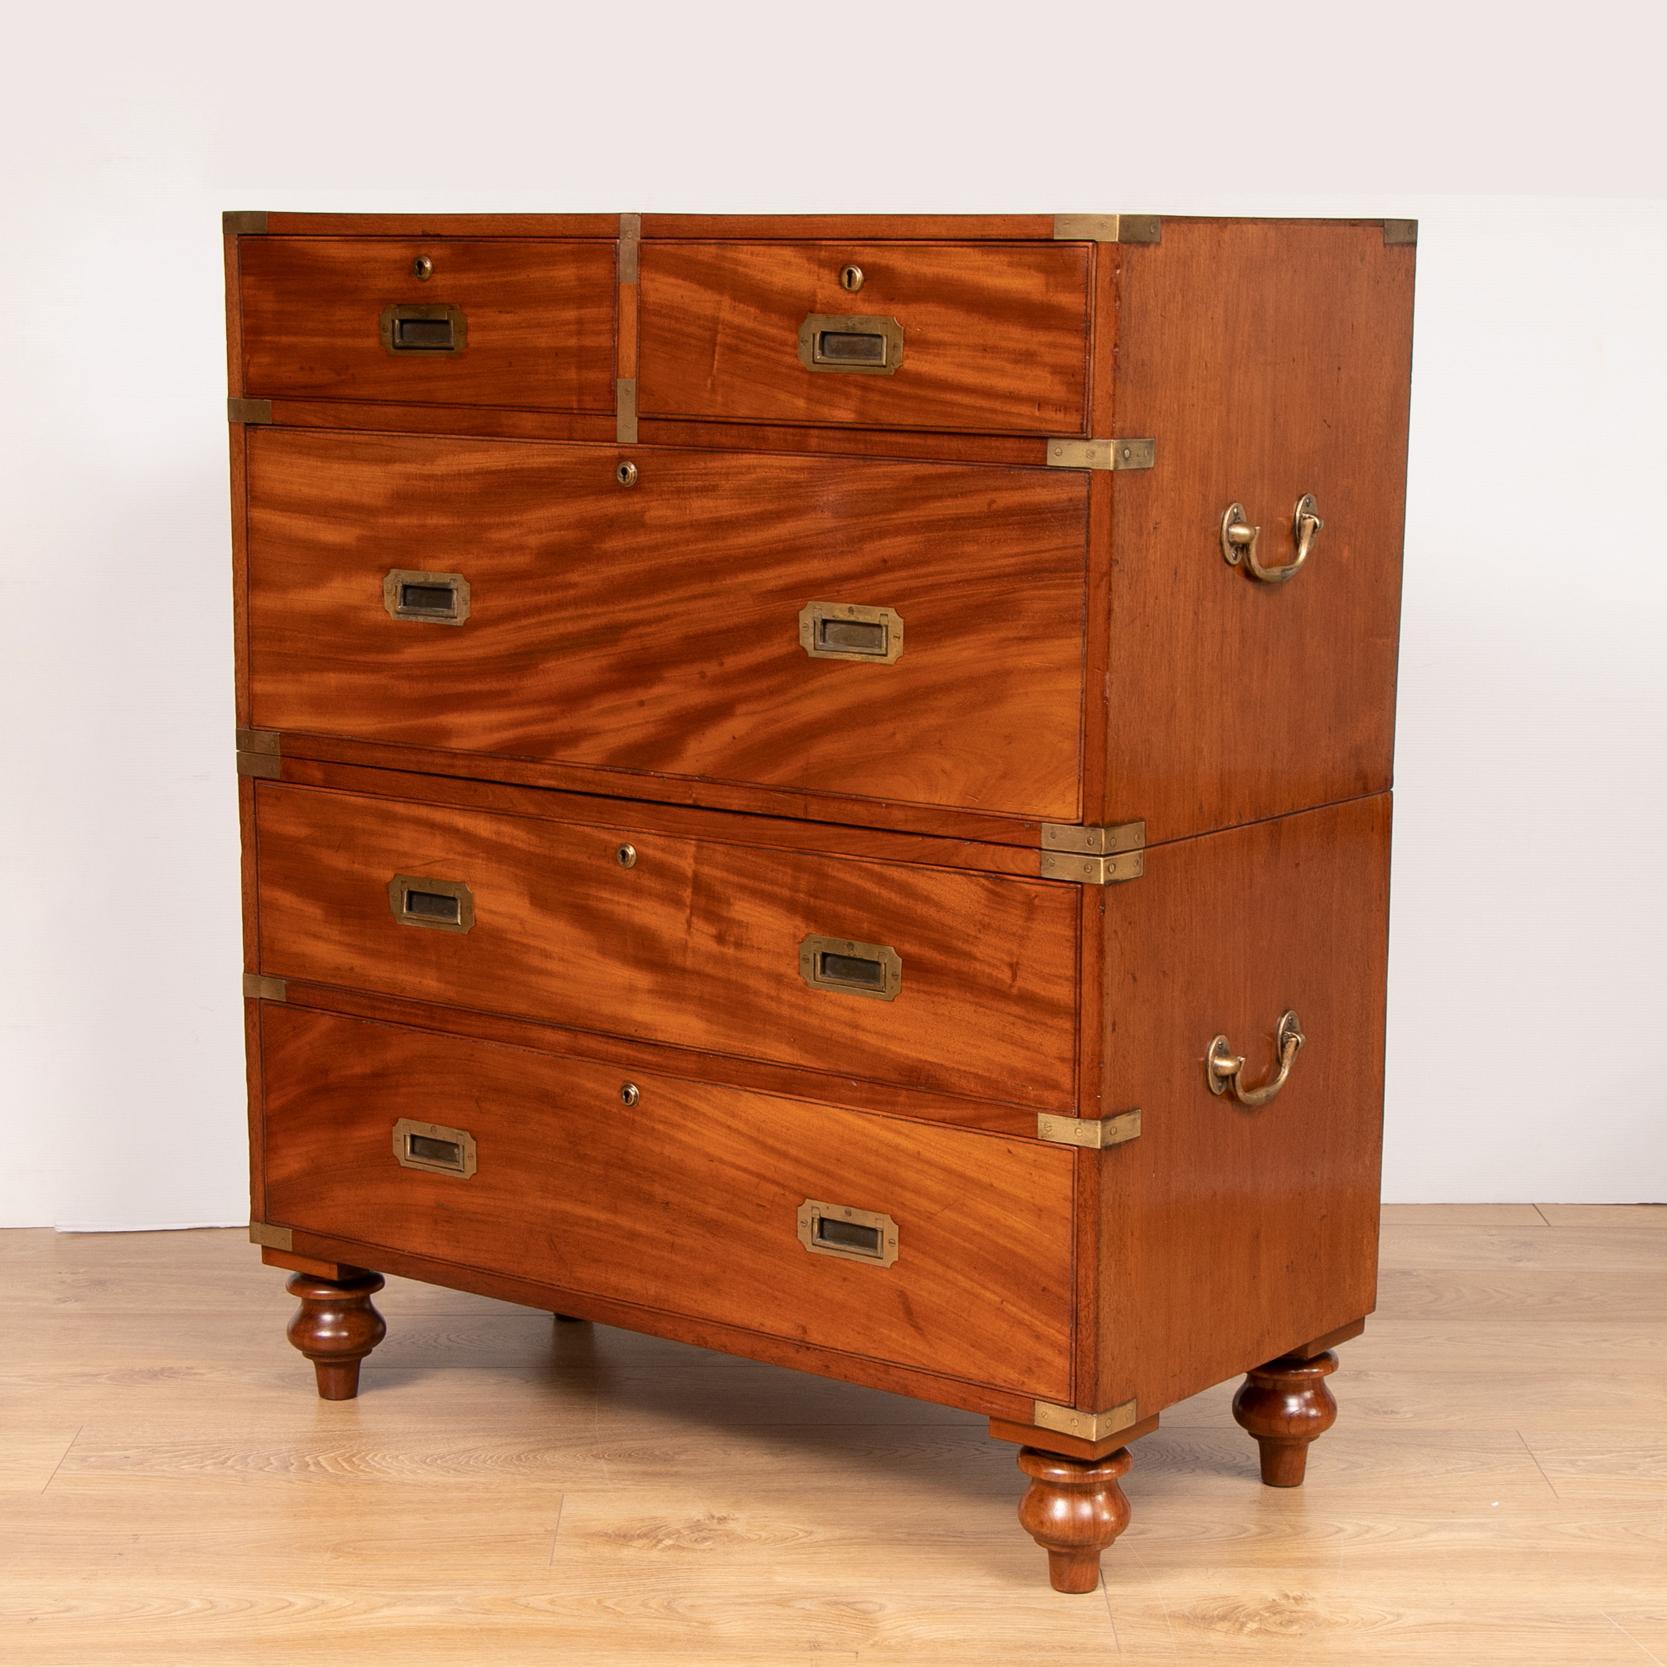 A superb 19th century military mahogany Campaign chest, professionally hand restored and bespoke French polished, with brass fittings and handles. It has a wonderful depth of color and patina and has that 